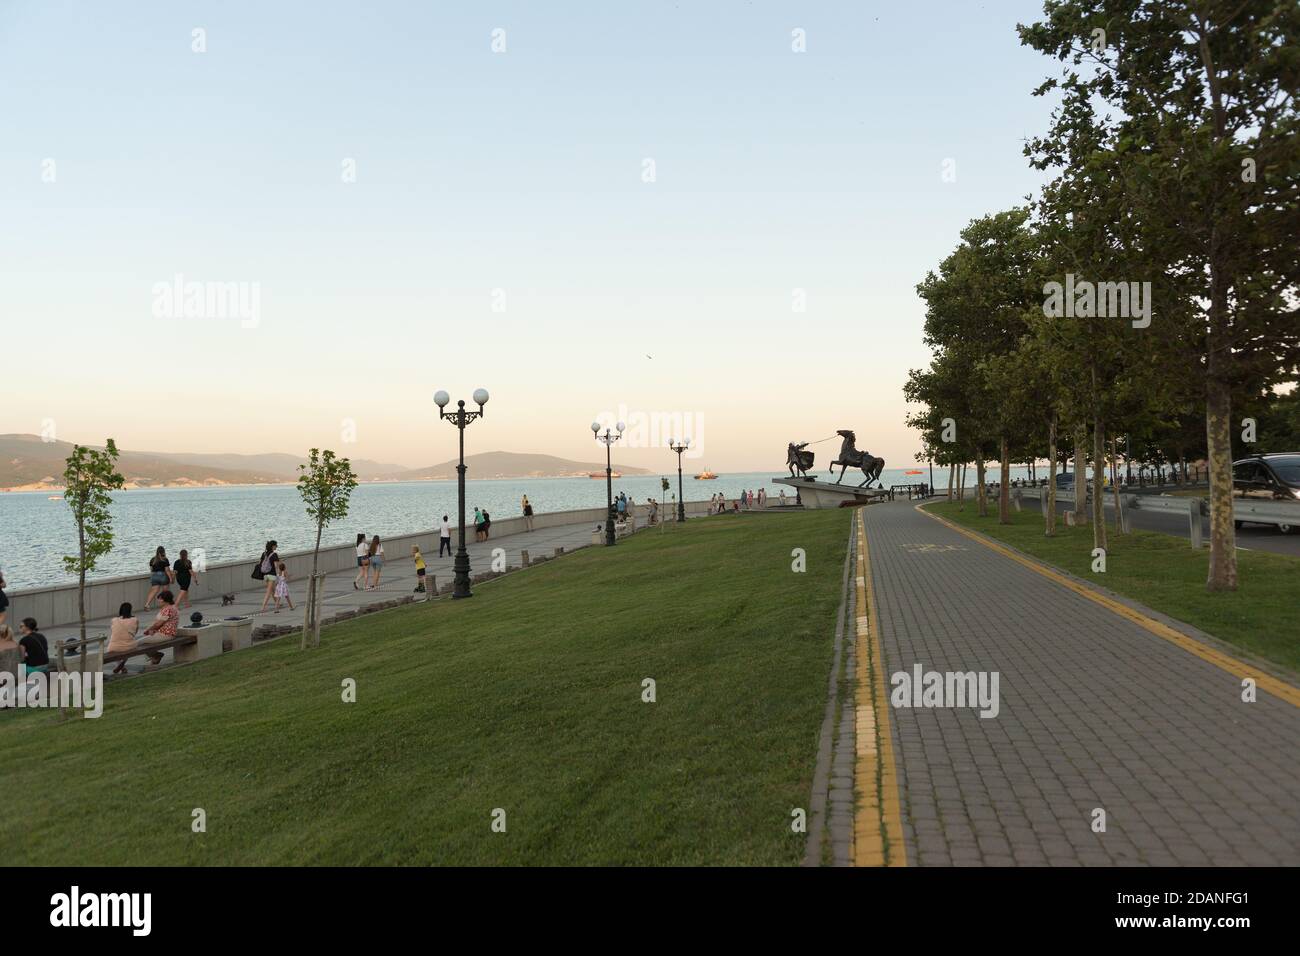 Russia, Novorossiysk, July 11, 2020: Evening embankment of Admiral Serebryakov of the black sea city. Citizens and guests relax on the benches at suns Stock Photo